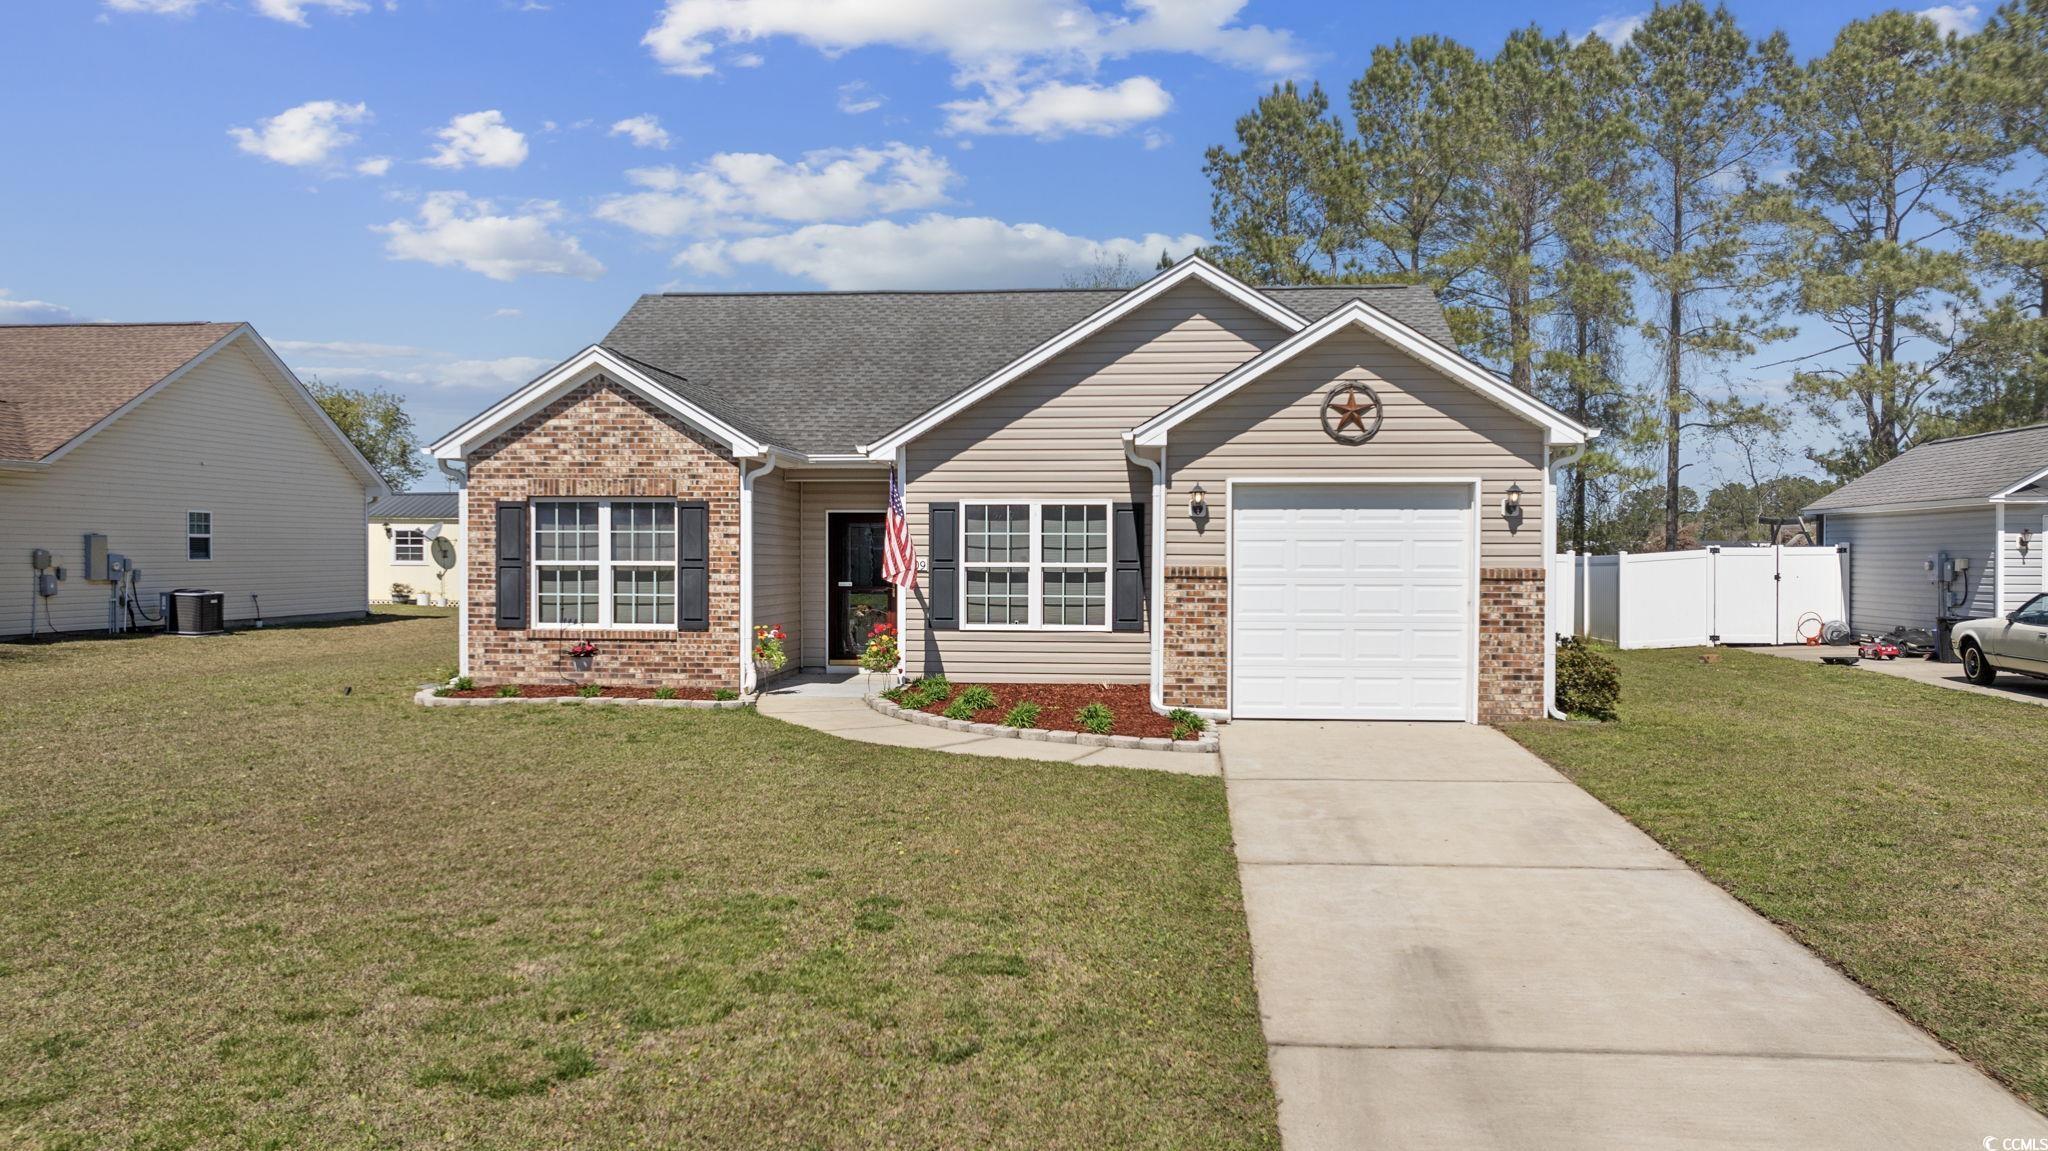 Photo one of 109 Cottage Creek Circle Conway SC 29527 | MLS 2407094